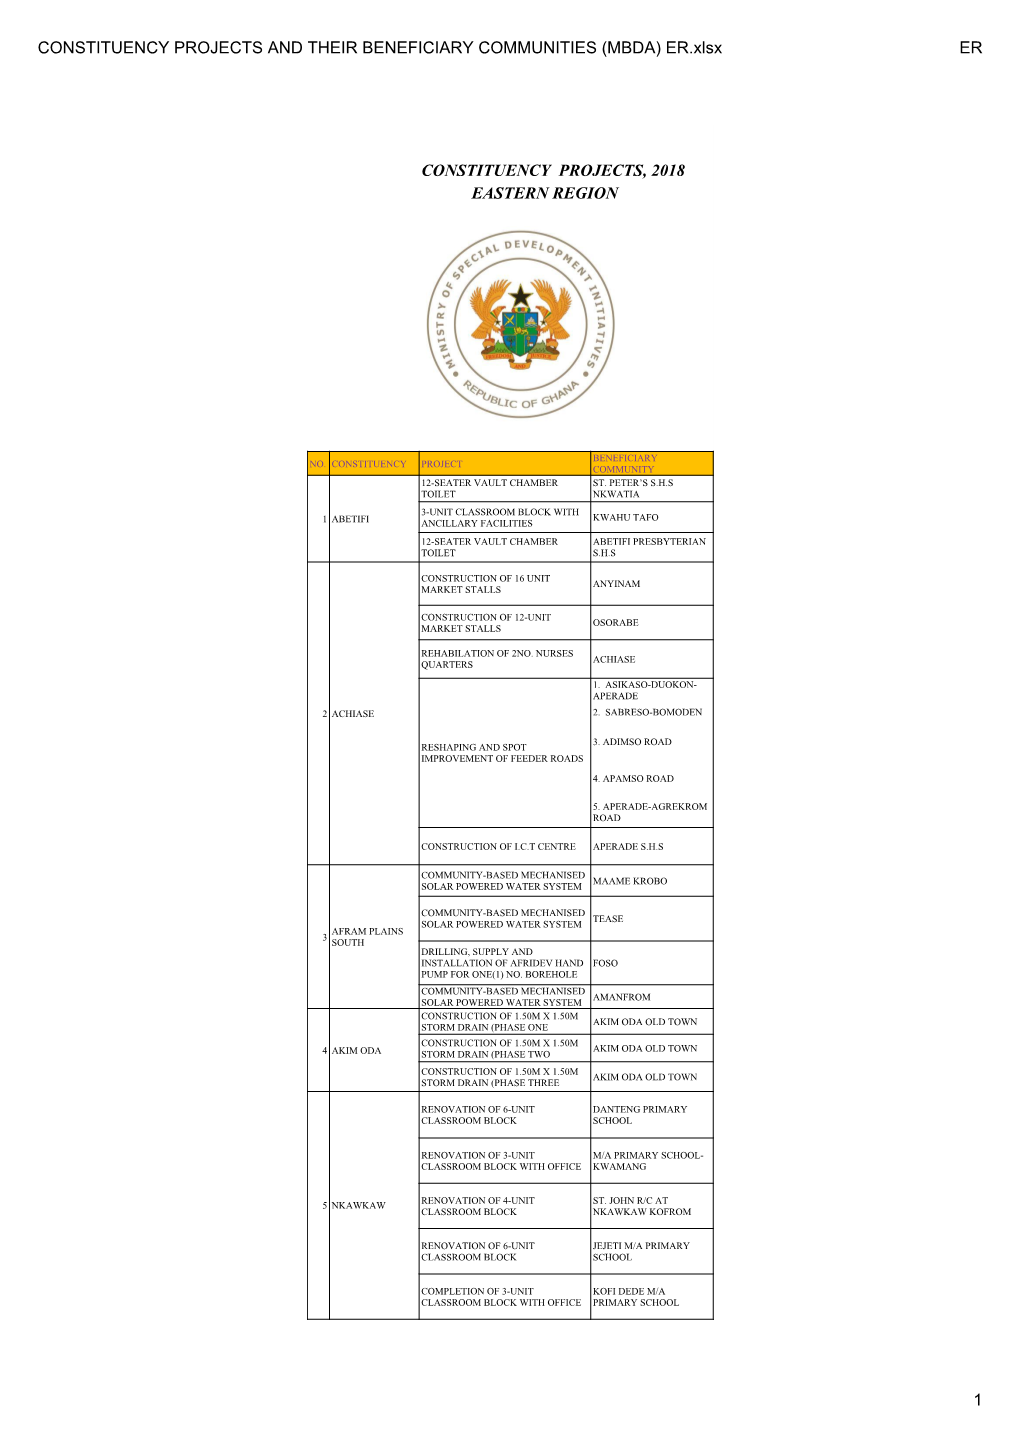 Constituency Projects and Their Beneficiary Communities in The